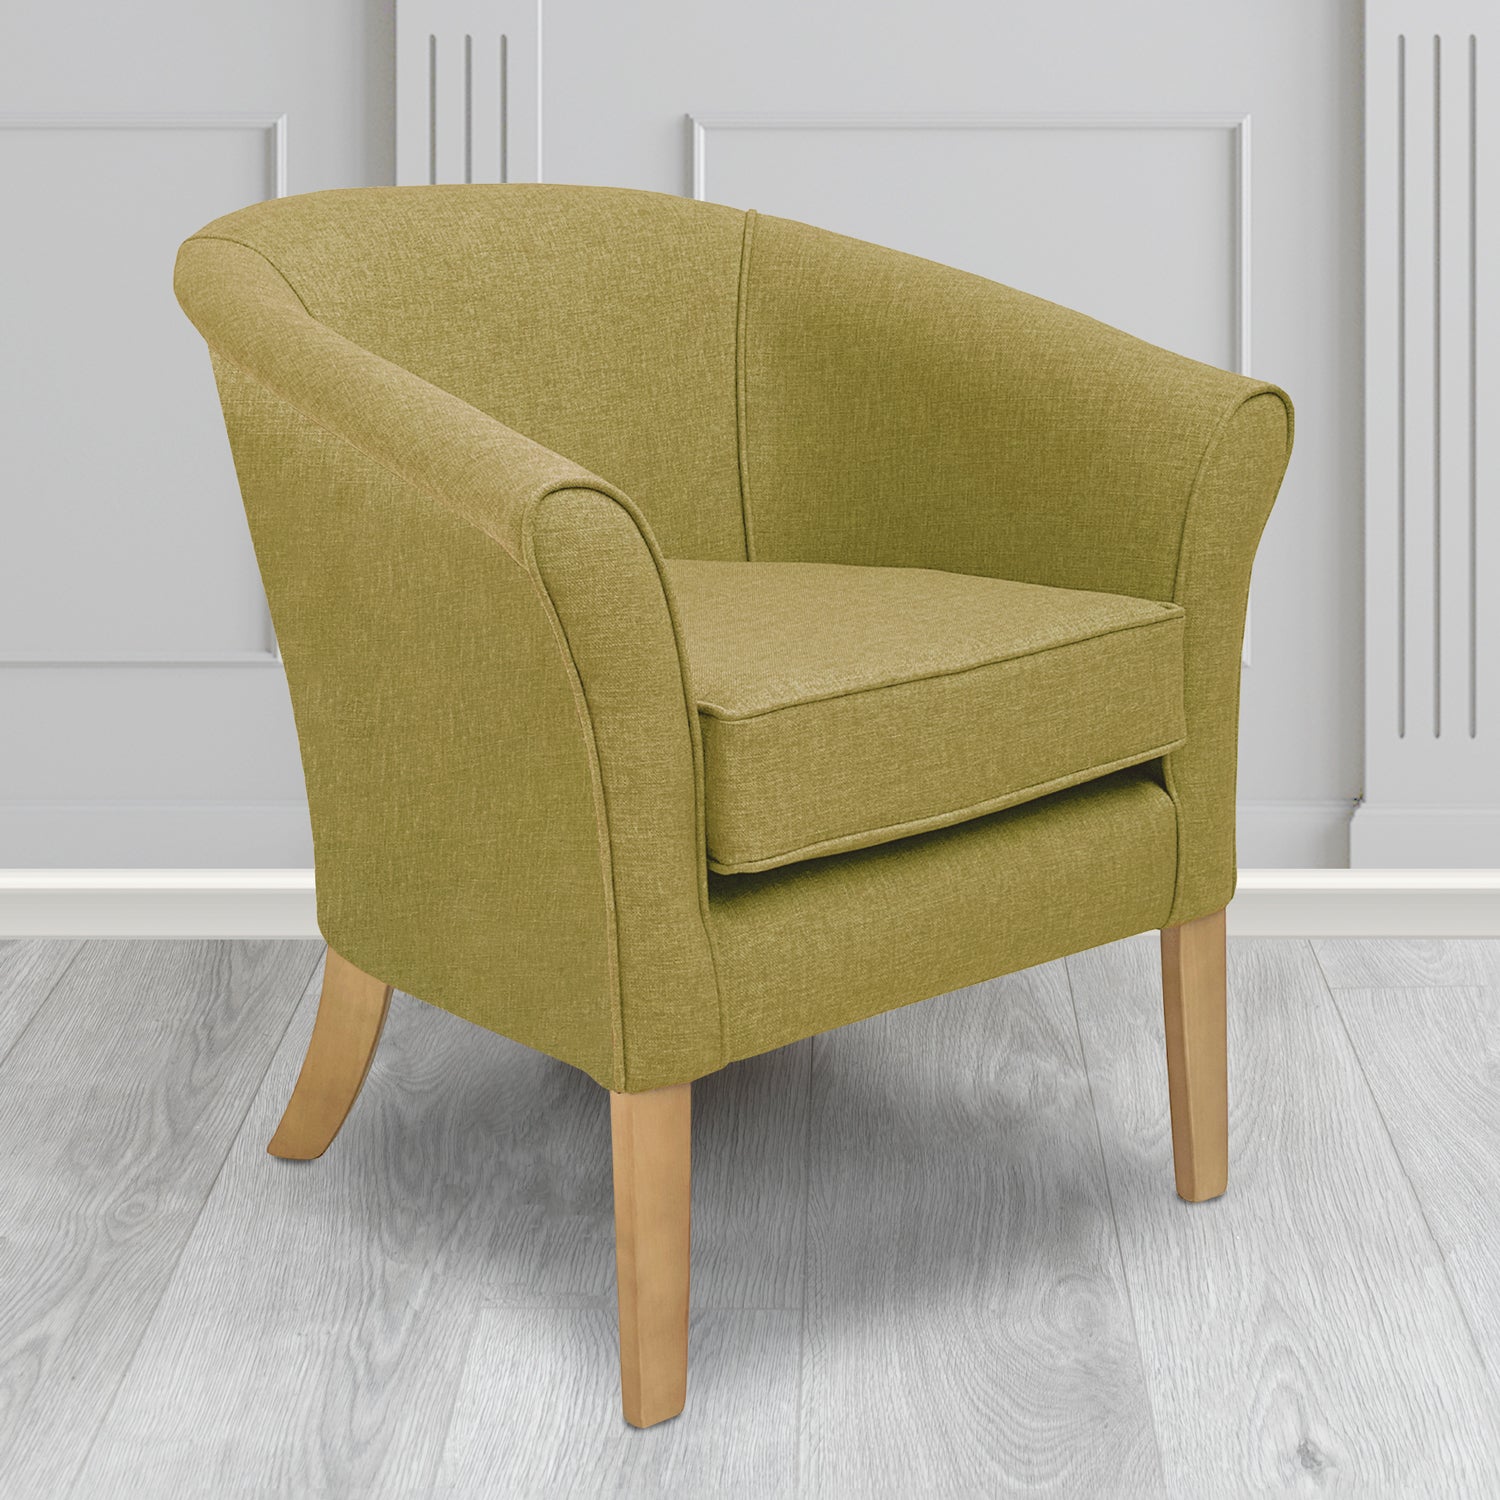 Aspen Tub Chair in Marna 238 Citrus Crib 5 Fabric - Antimicrobial, Stain Resistant & Waterproof - The Tub Chair Shop